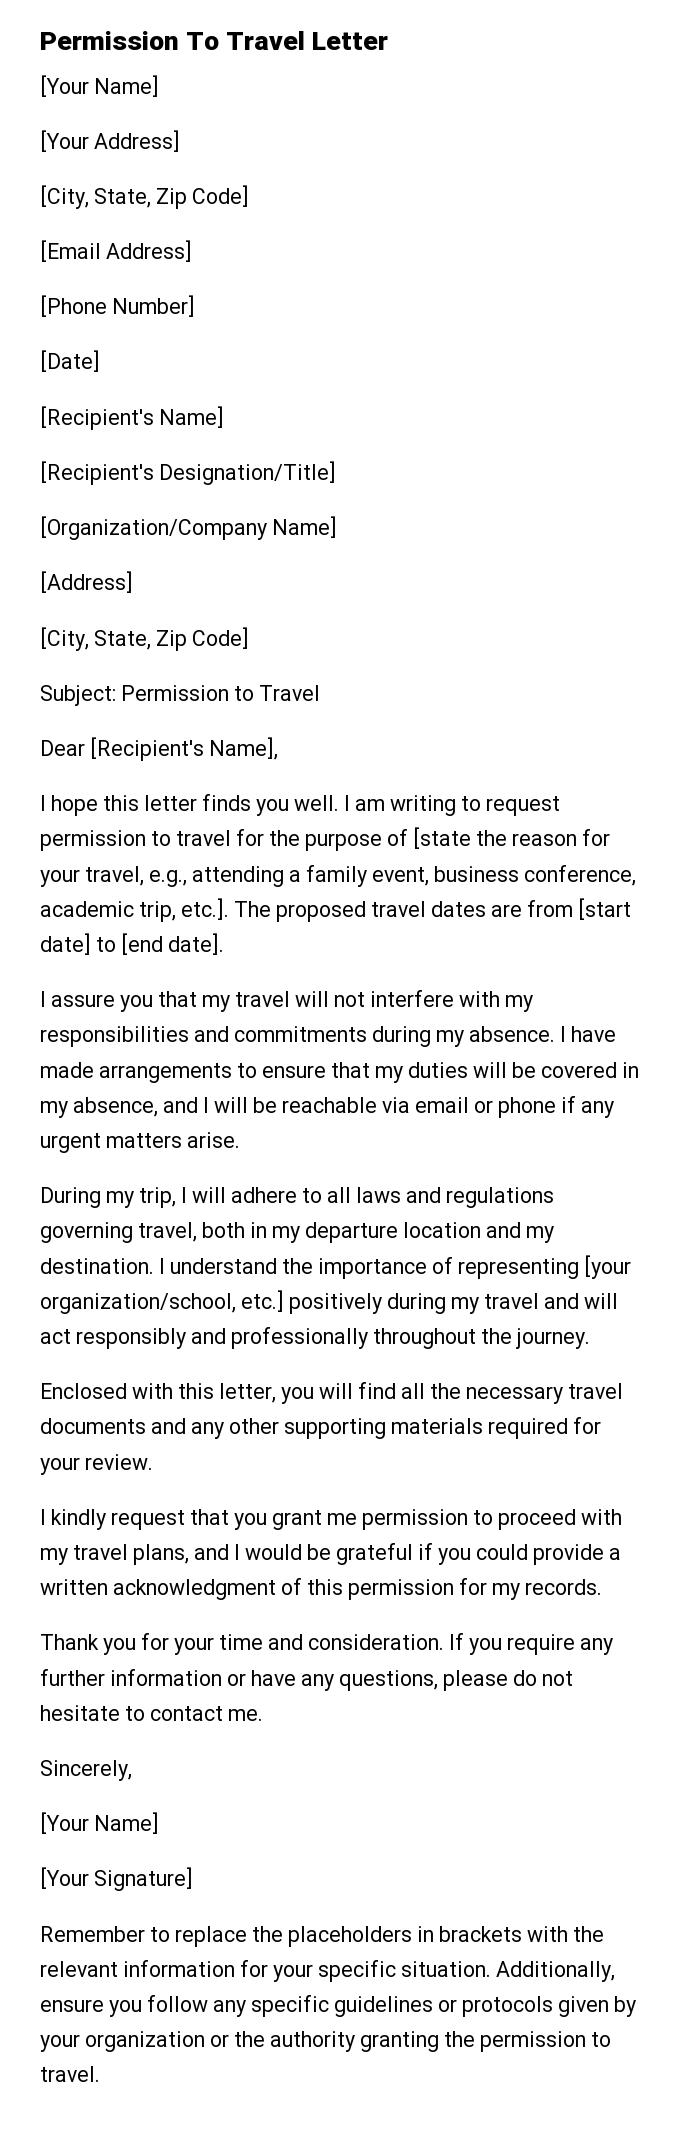 Permission To Travel Letter